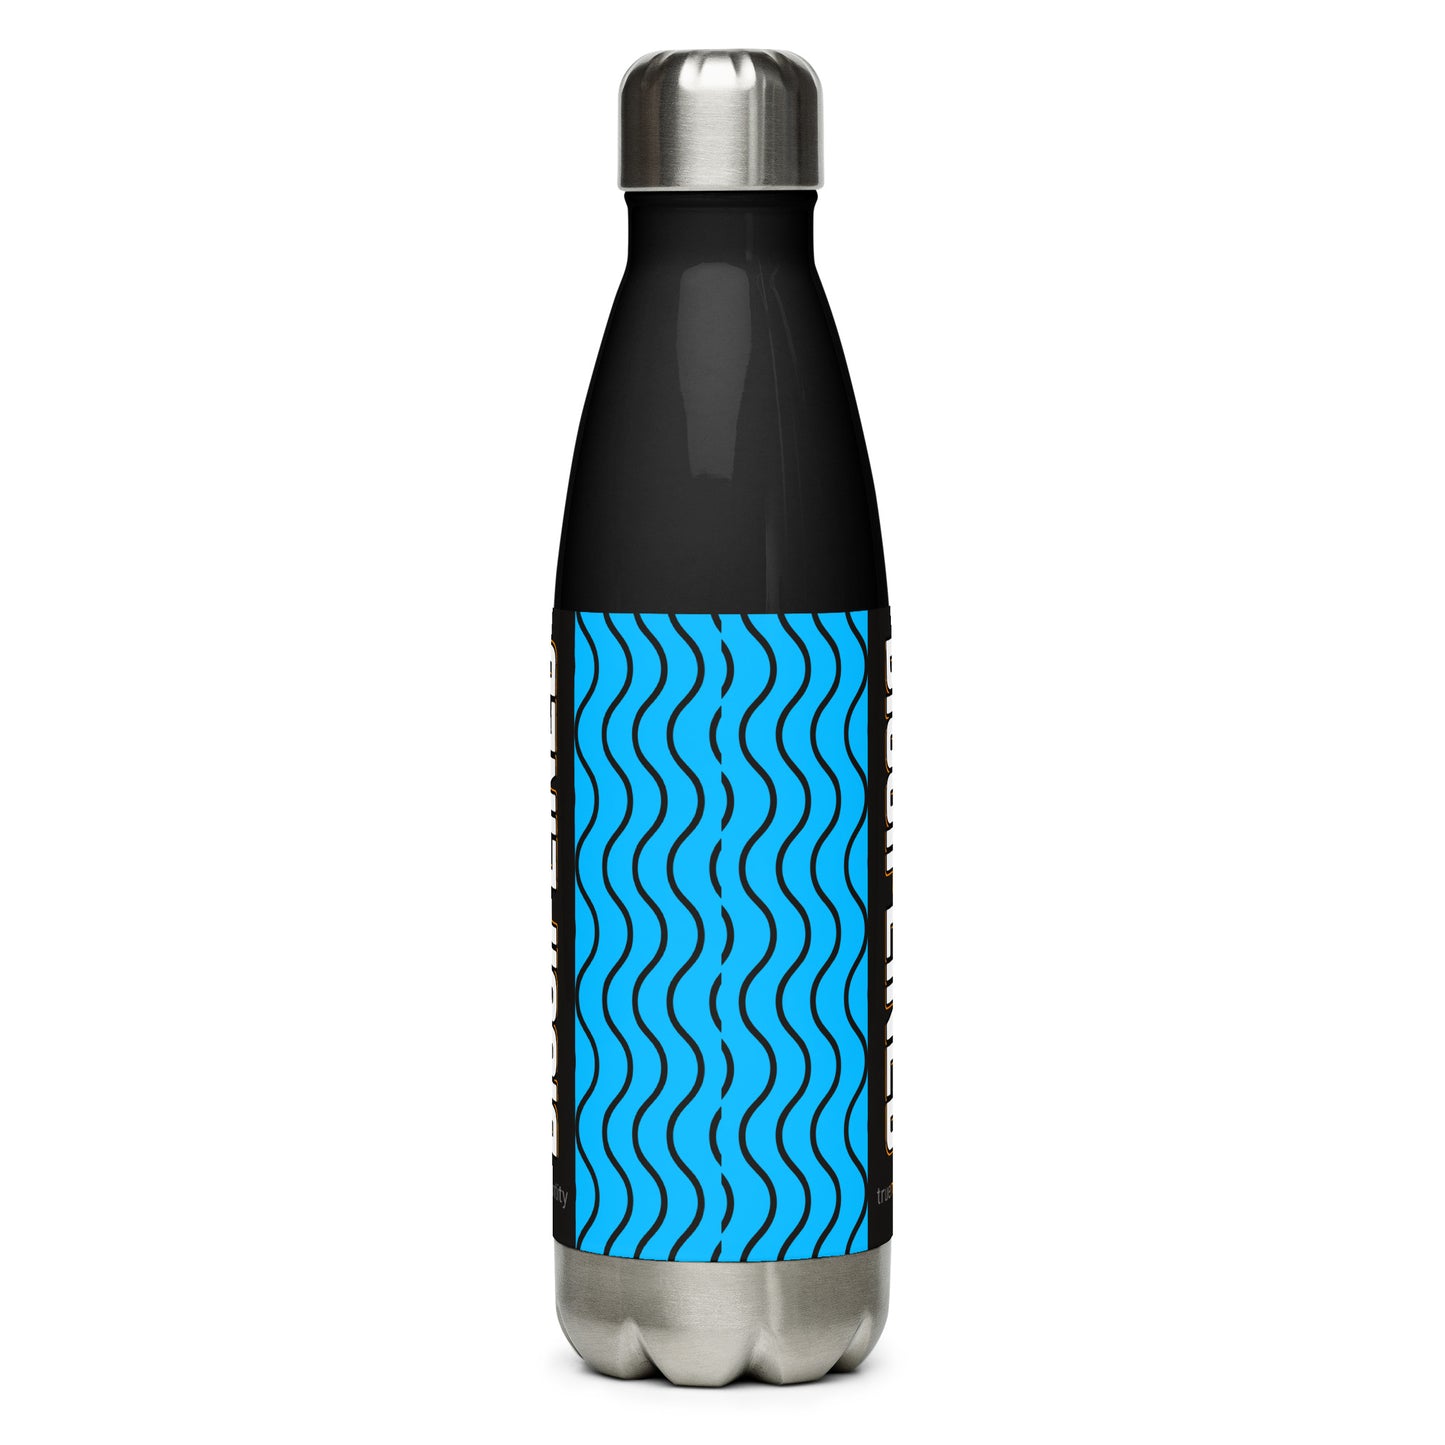 DISCIPLINED Stainless Steel Water Bottle Blue Wave Design, 17 oz, in Black or White